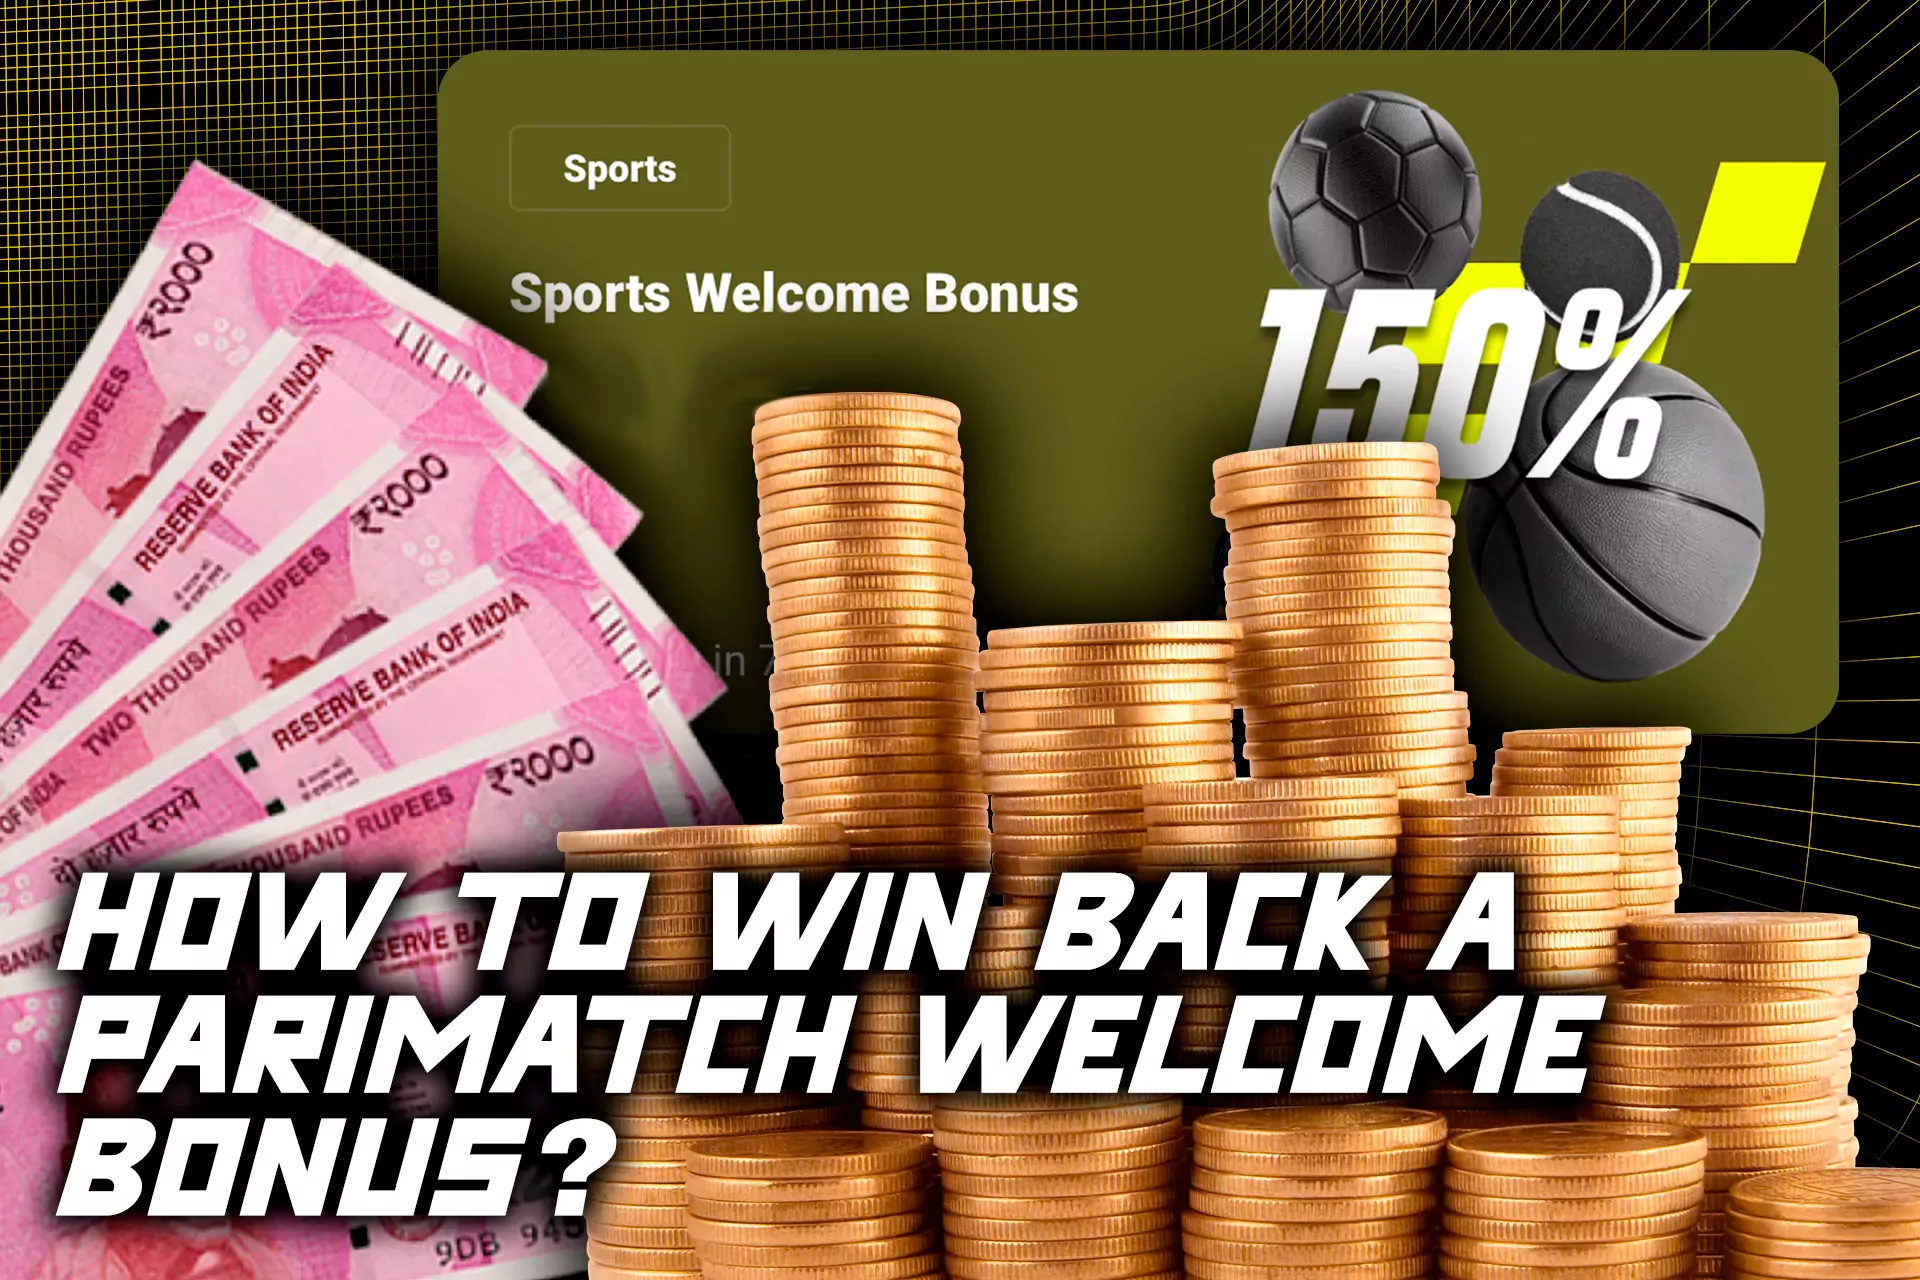 Follow our tips attentively to increase the chances of winning the welcome bonus back.